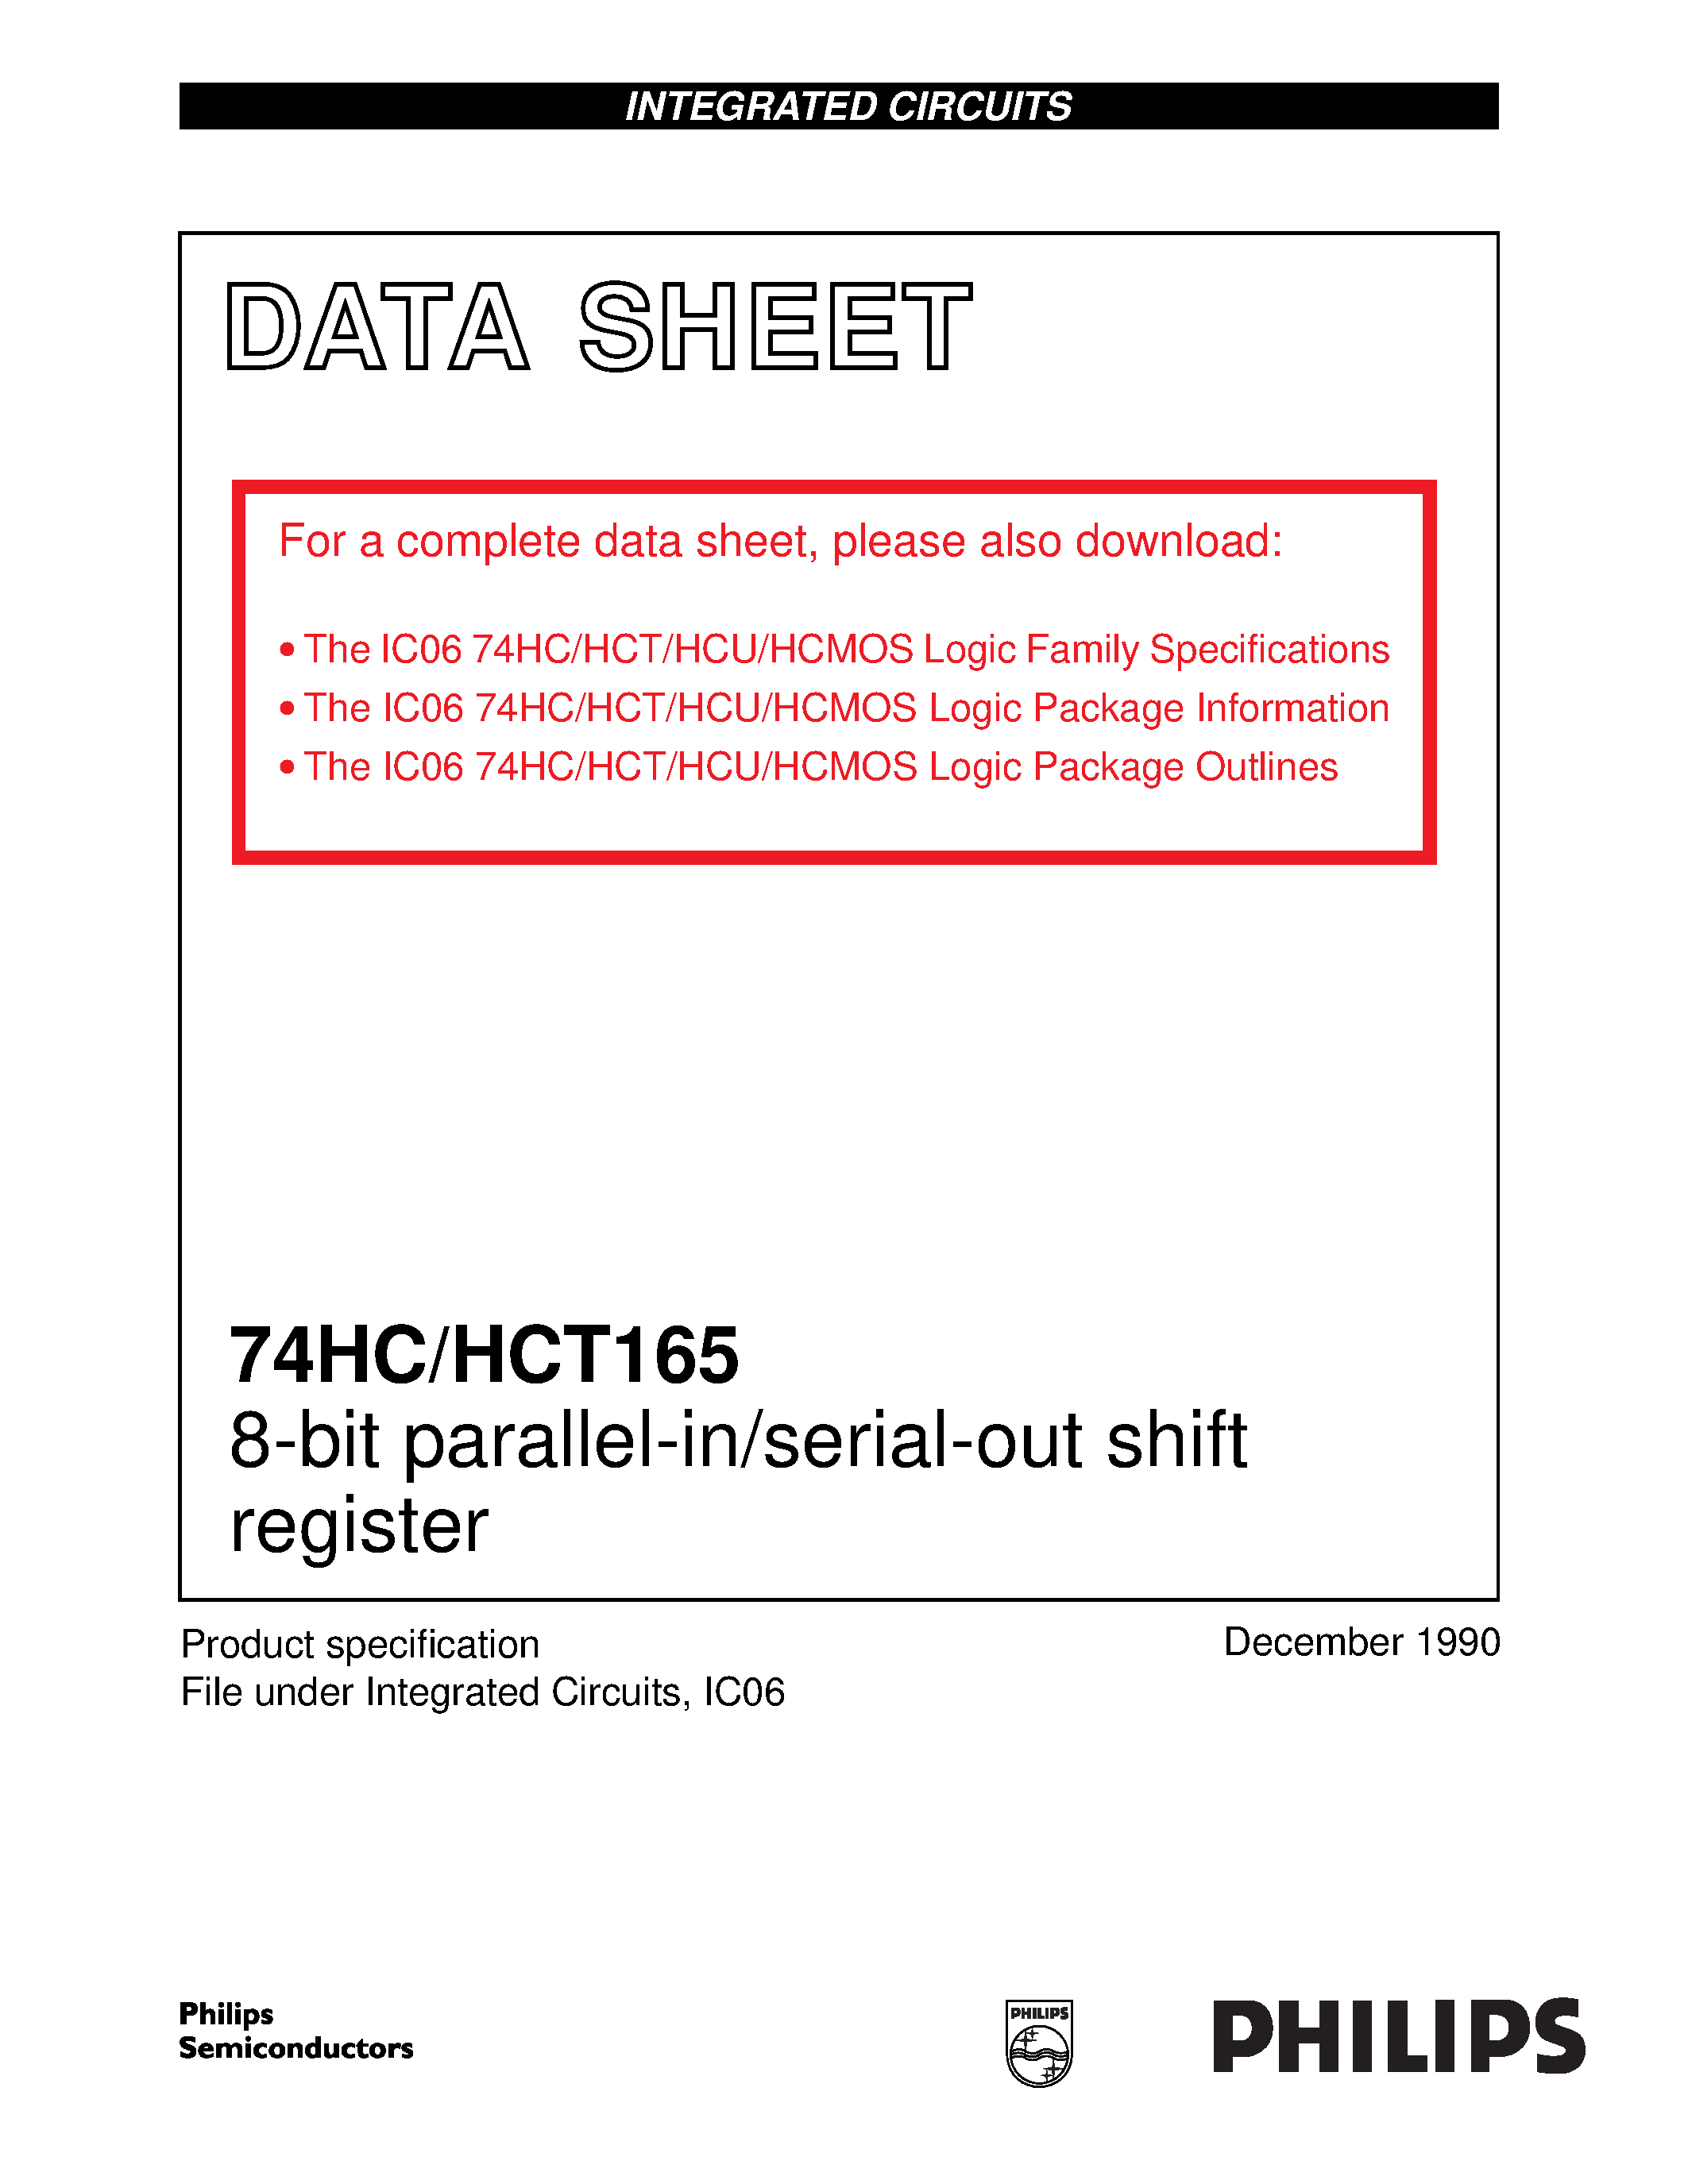 Datasheet 74HCT165 - 8-bit parallel-in/serial-out shift register page 1